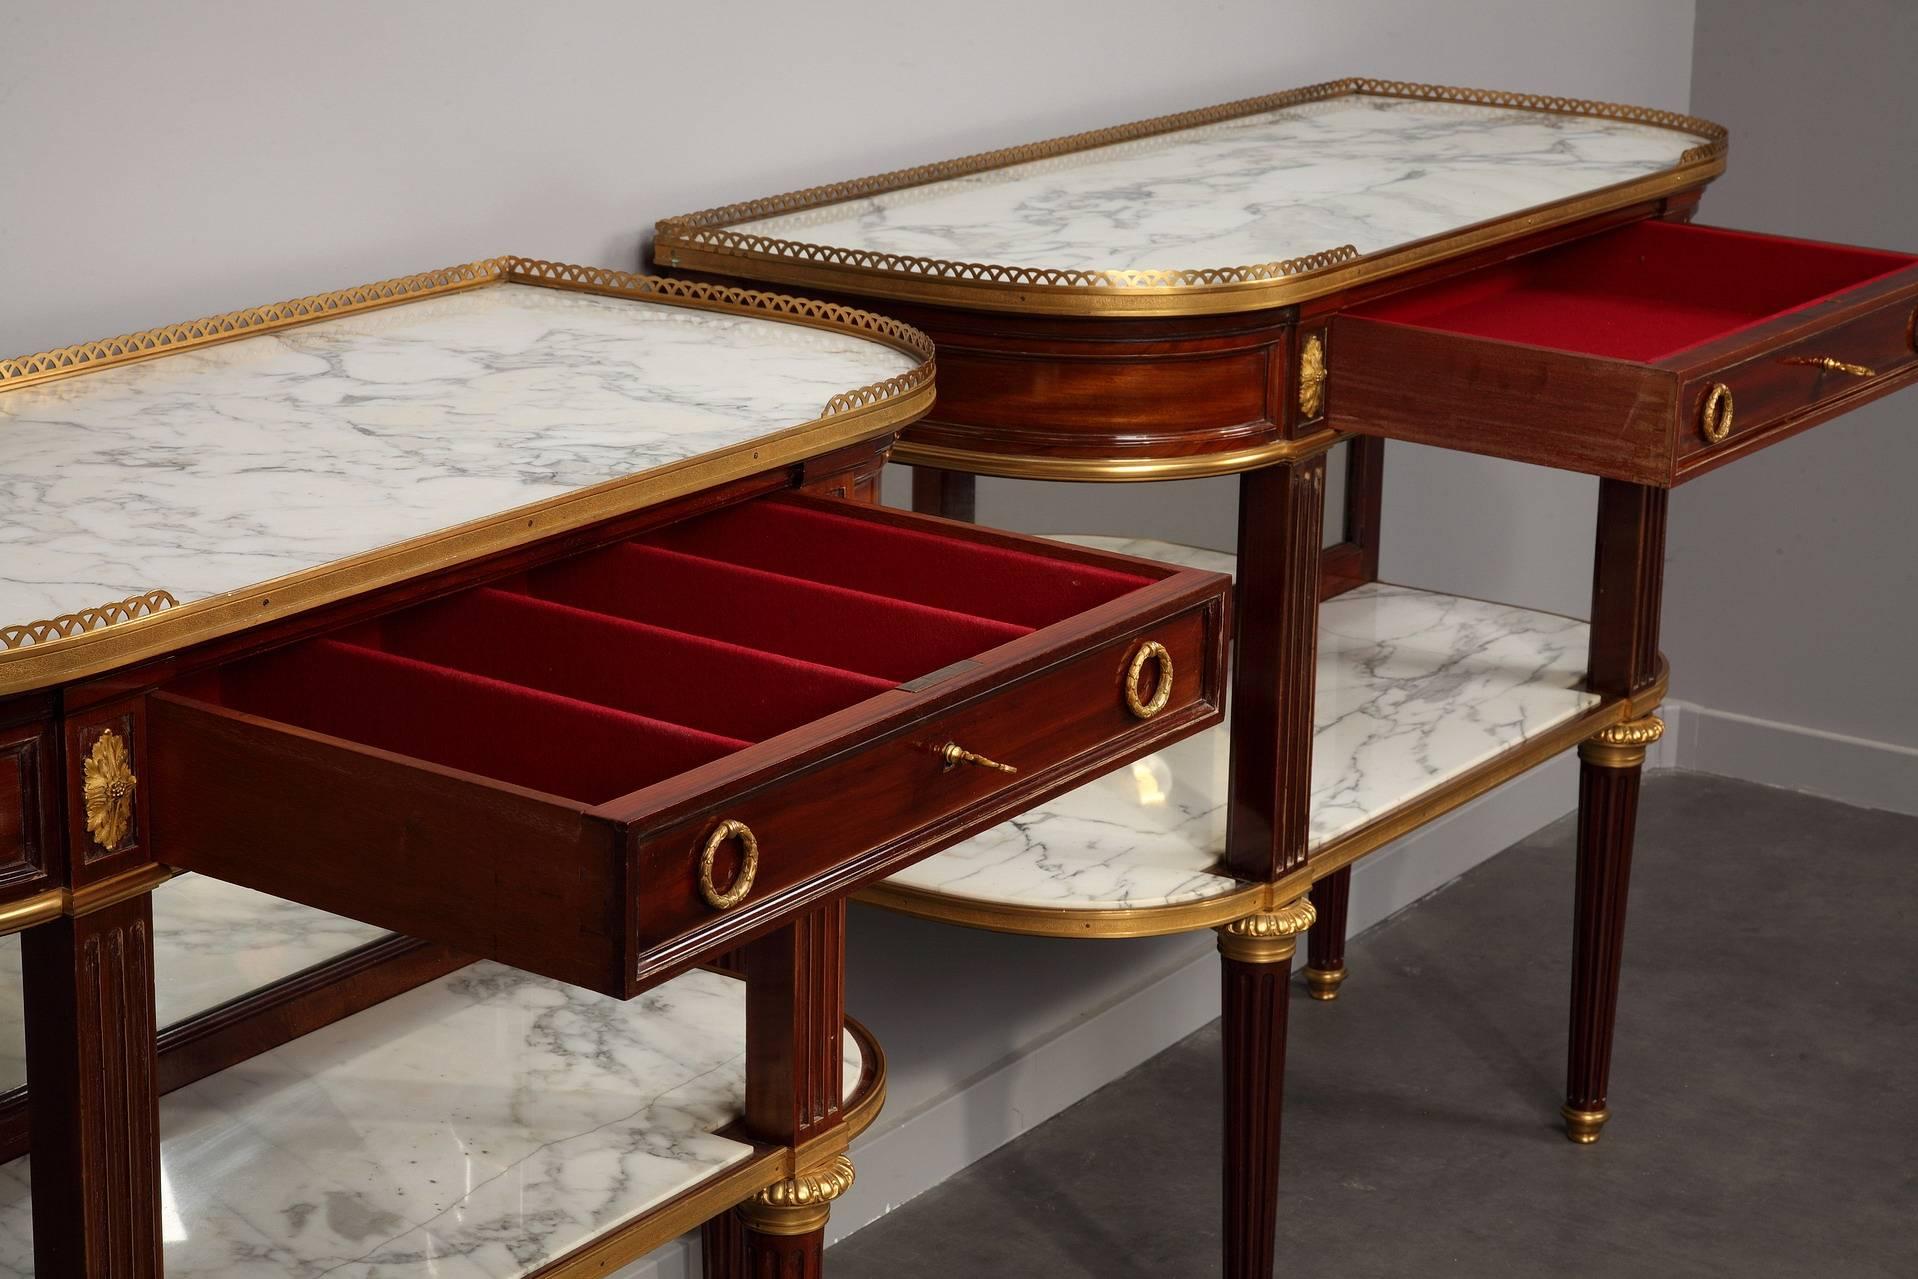 Pair of dessert consoles in mahogany veneer, marble and gilt bronze. The white marble top of each console rests on top of one wide, central drawer provided with two ormolu laurel crown shaped handles. The central facade features an additional marble